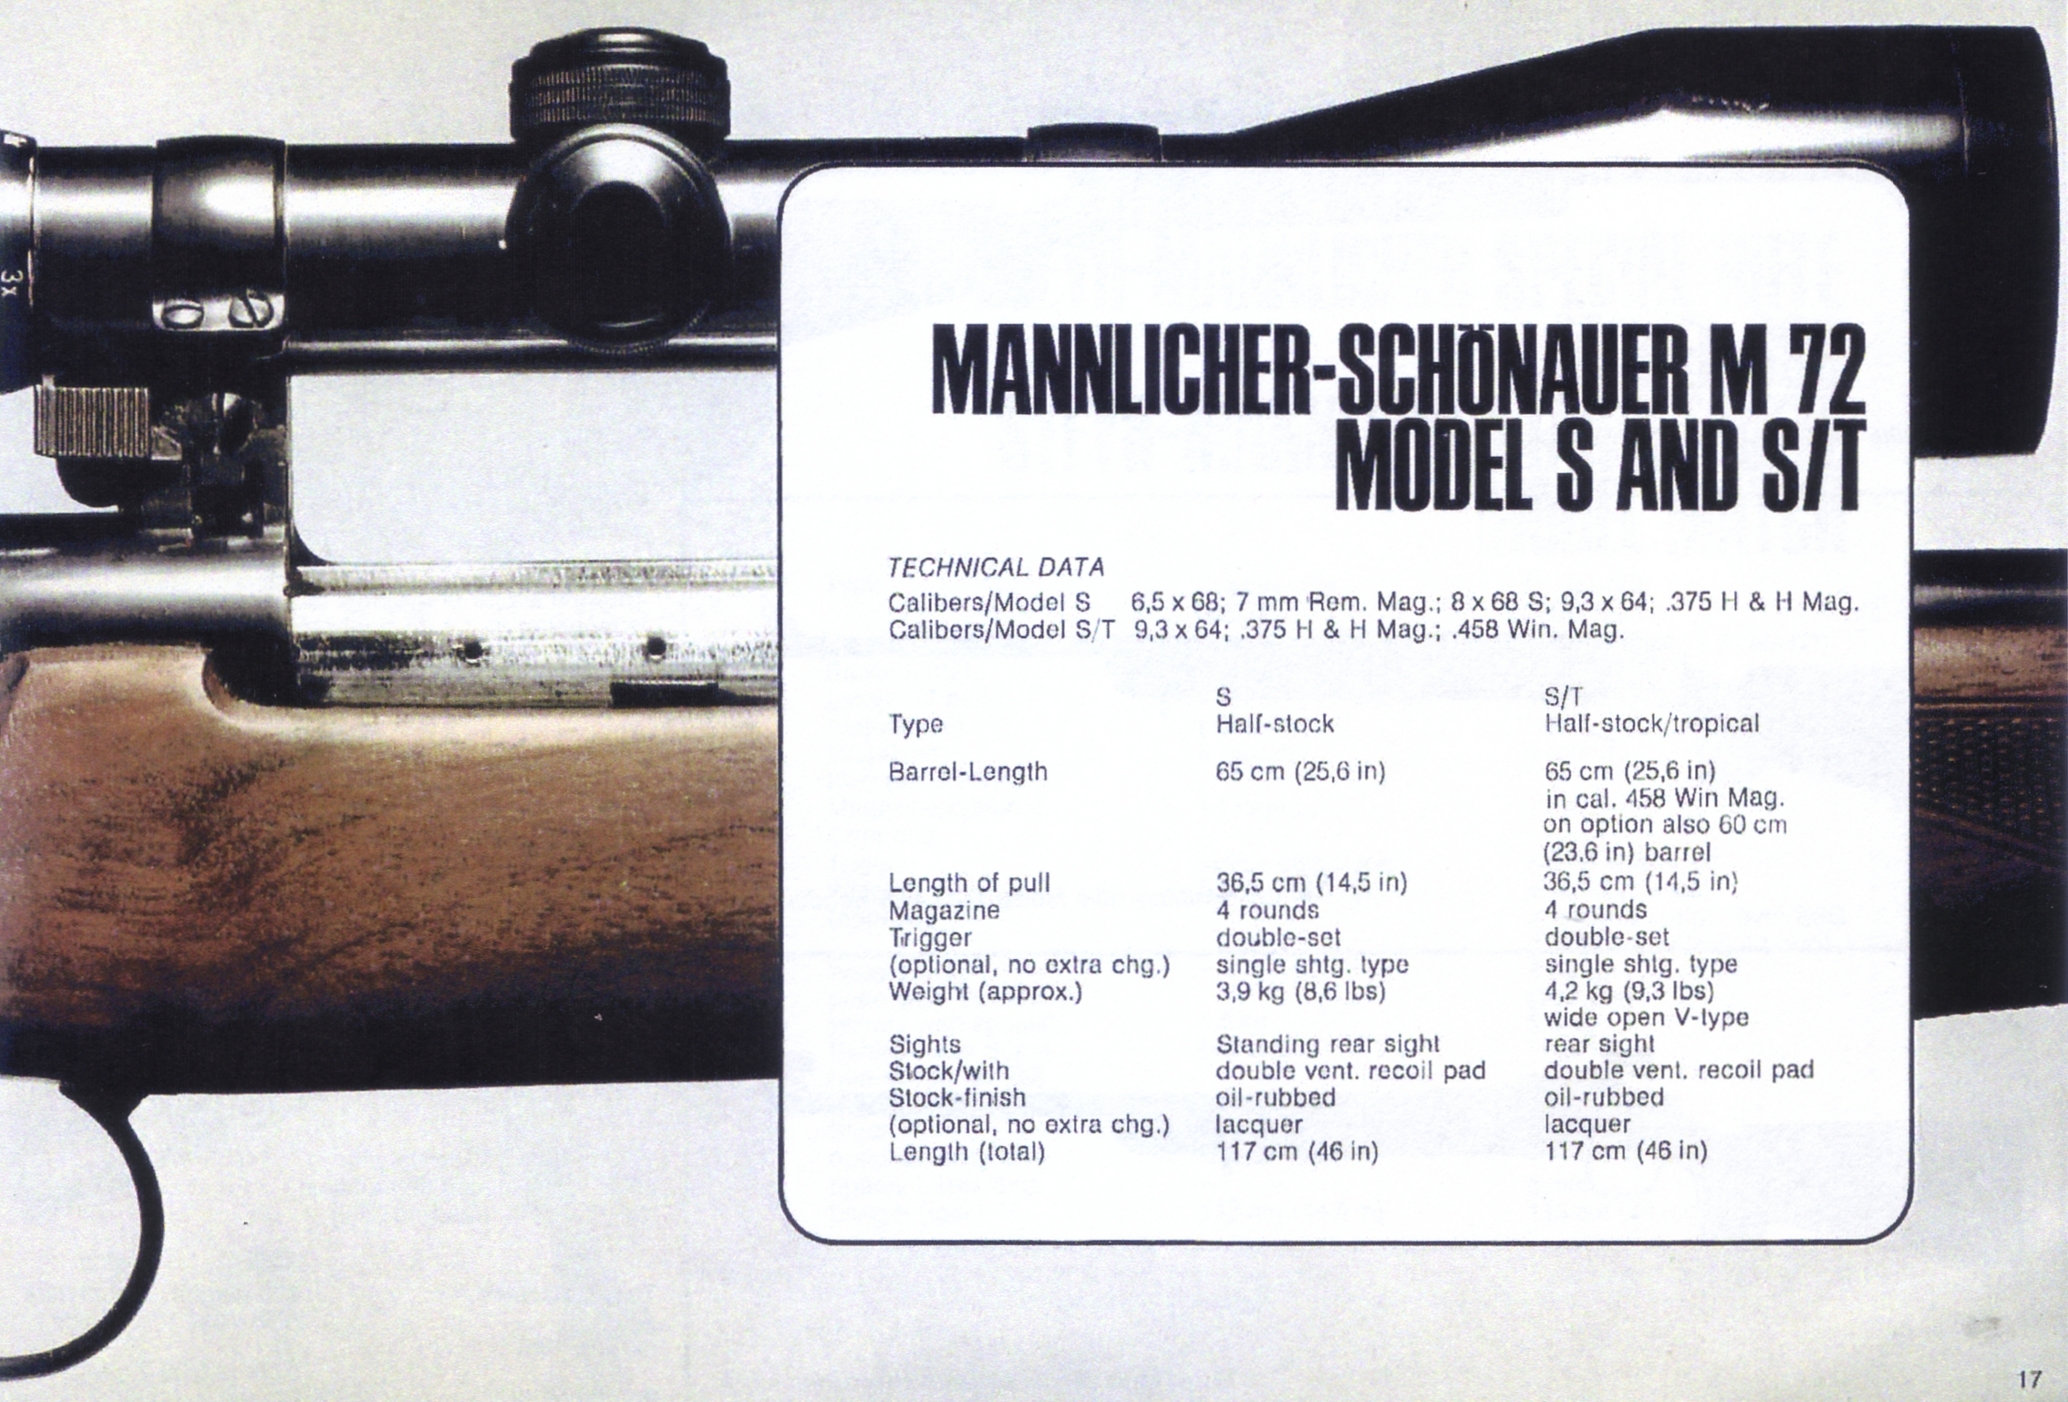 The Mannlicher-Schönauer M72 Model S and Model S/T specifications, calibers and other options. (Picture from the original Steyr catalog and courtesy of Steyr.)